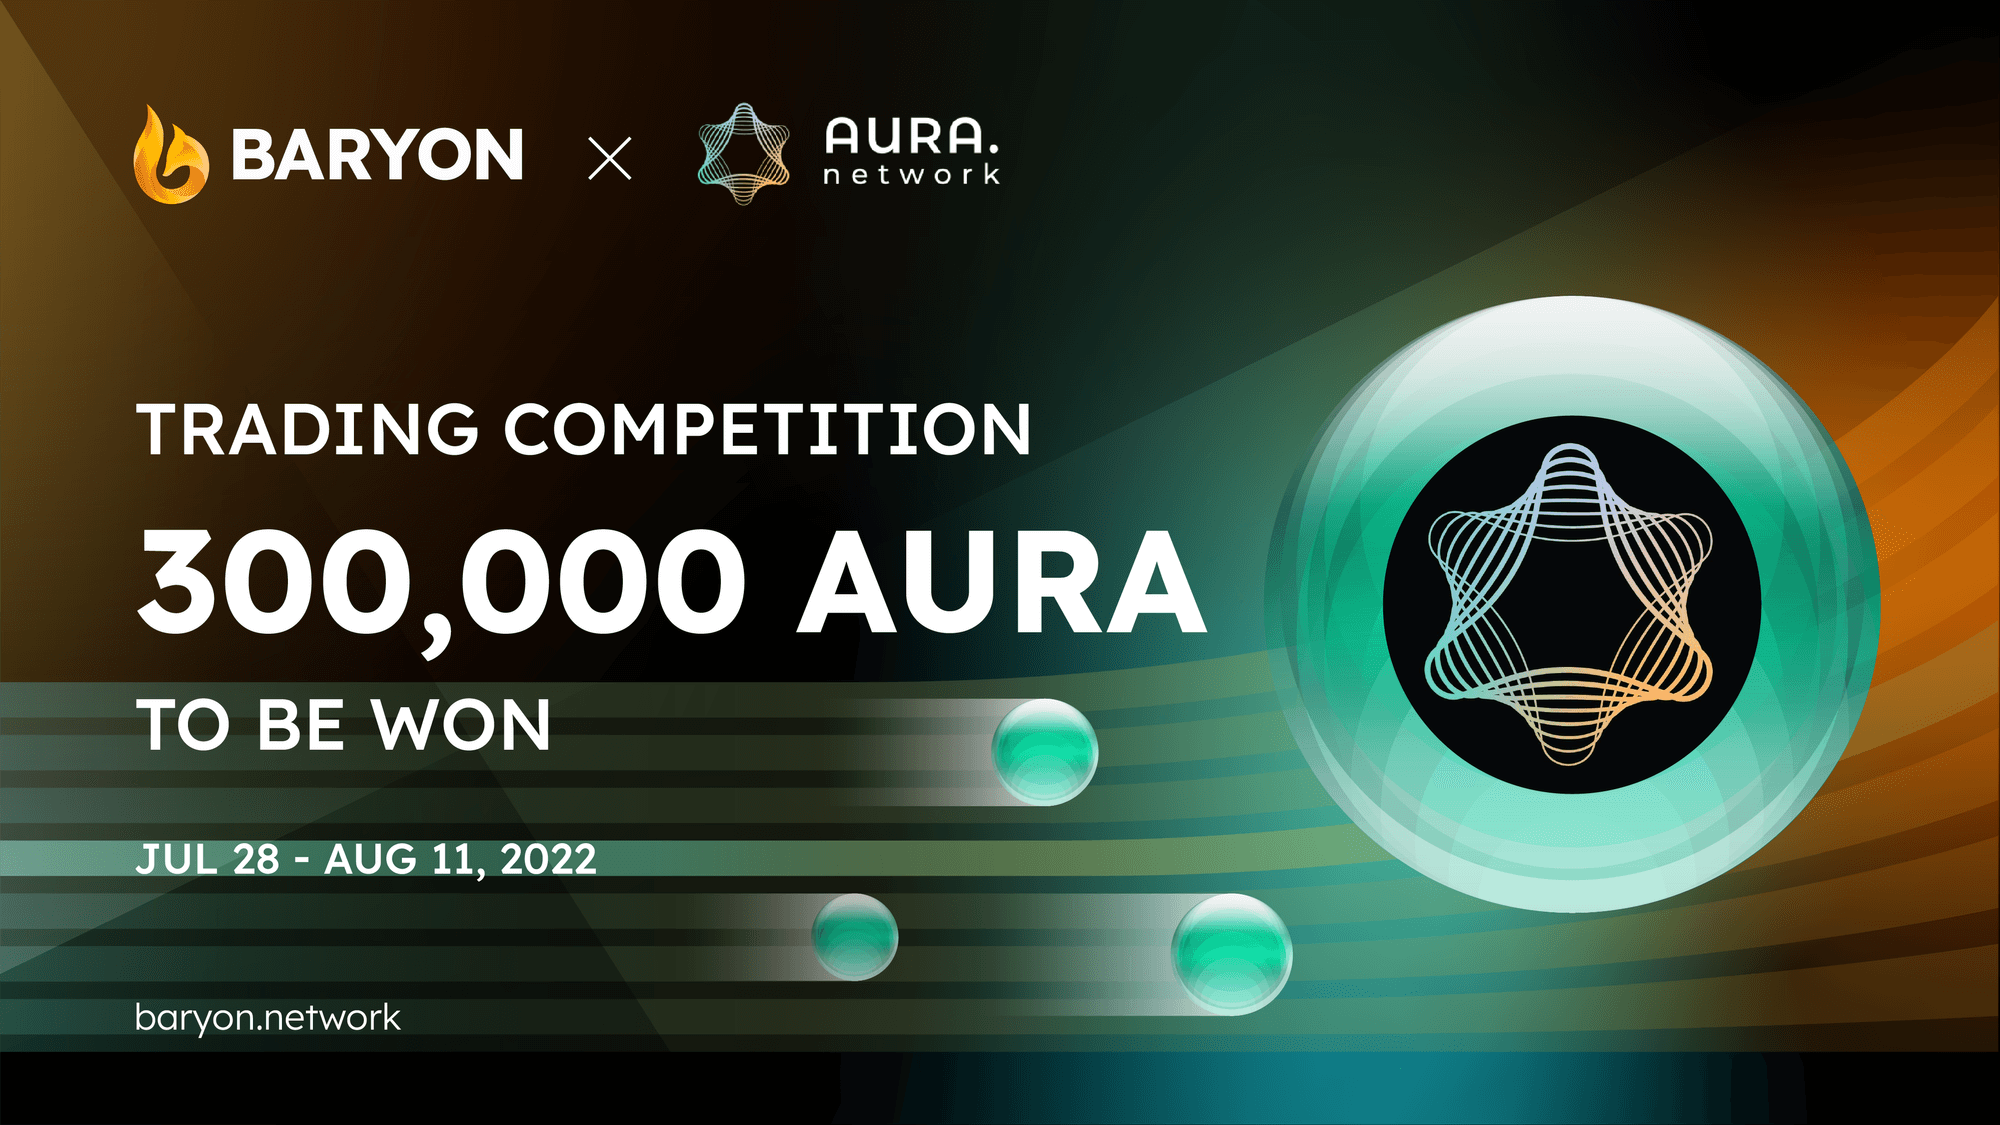 Aura Network Trading Competition - Time to trade & earn up to 300,000 AURA